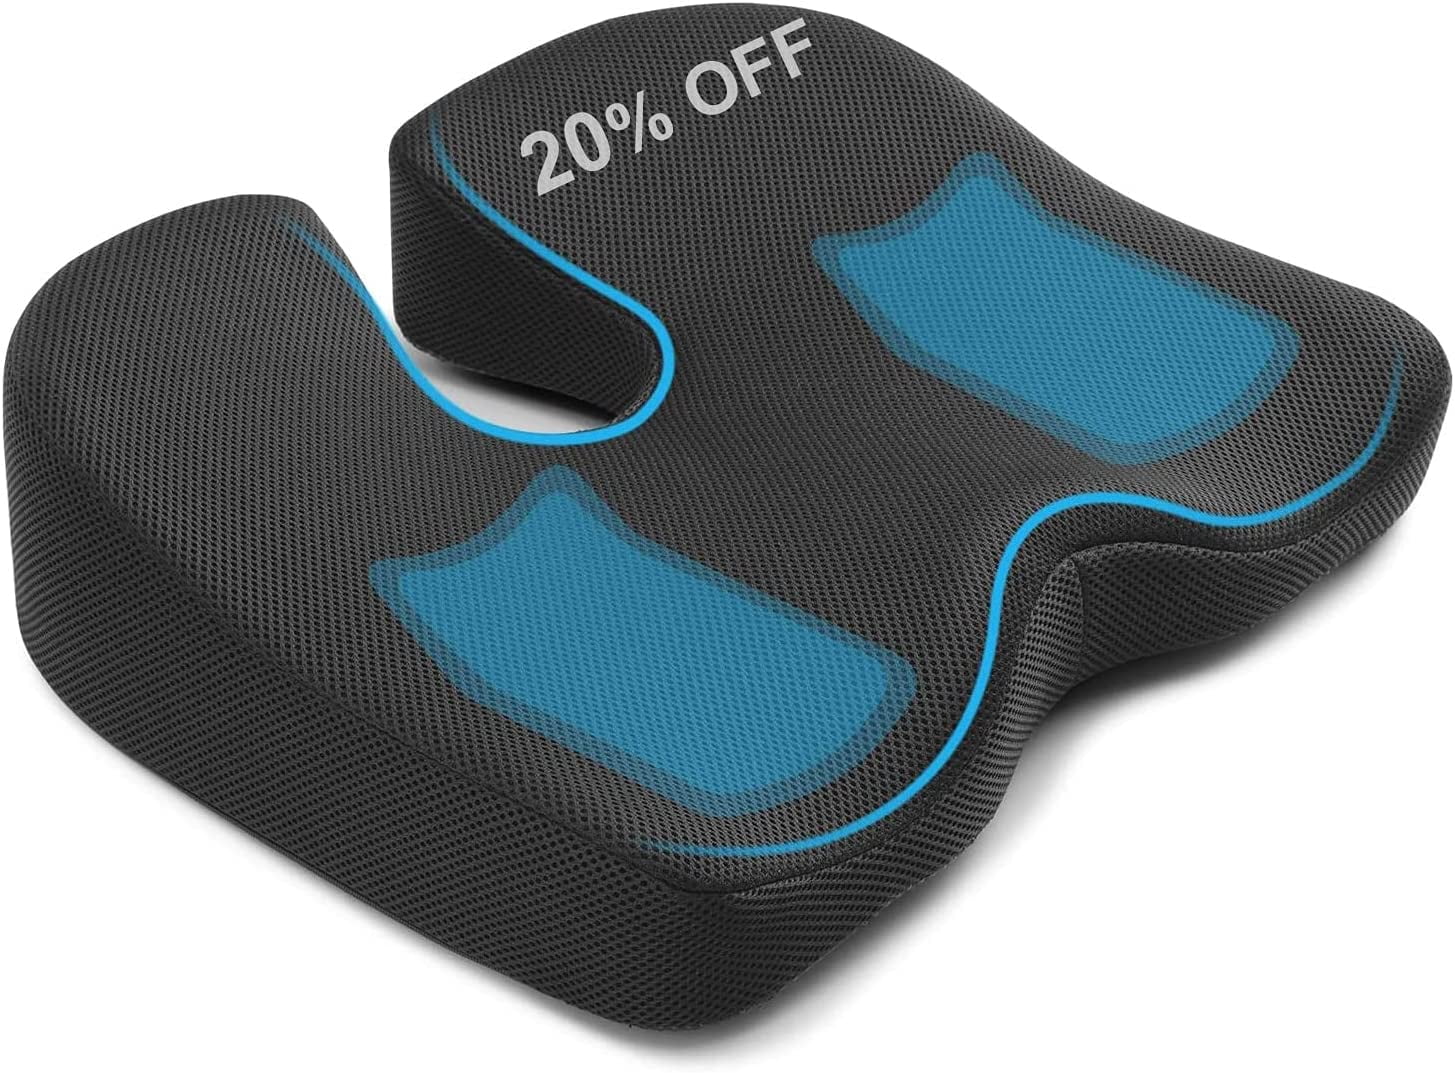 15 Best Seat Cushions For Sciatica Pain Relief, Expert-Approved